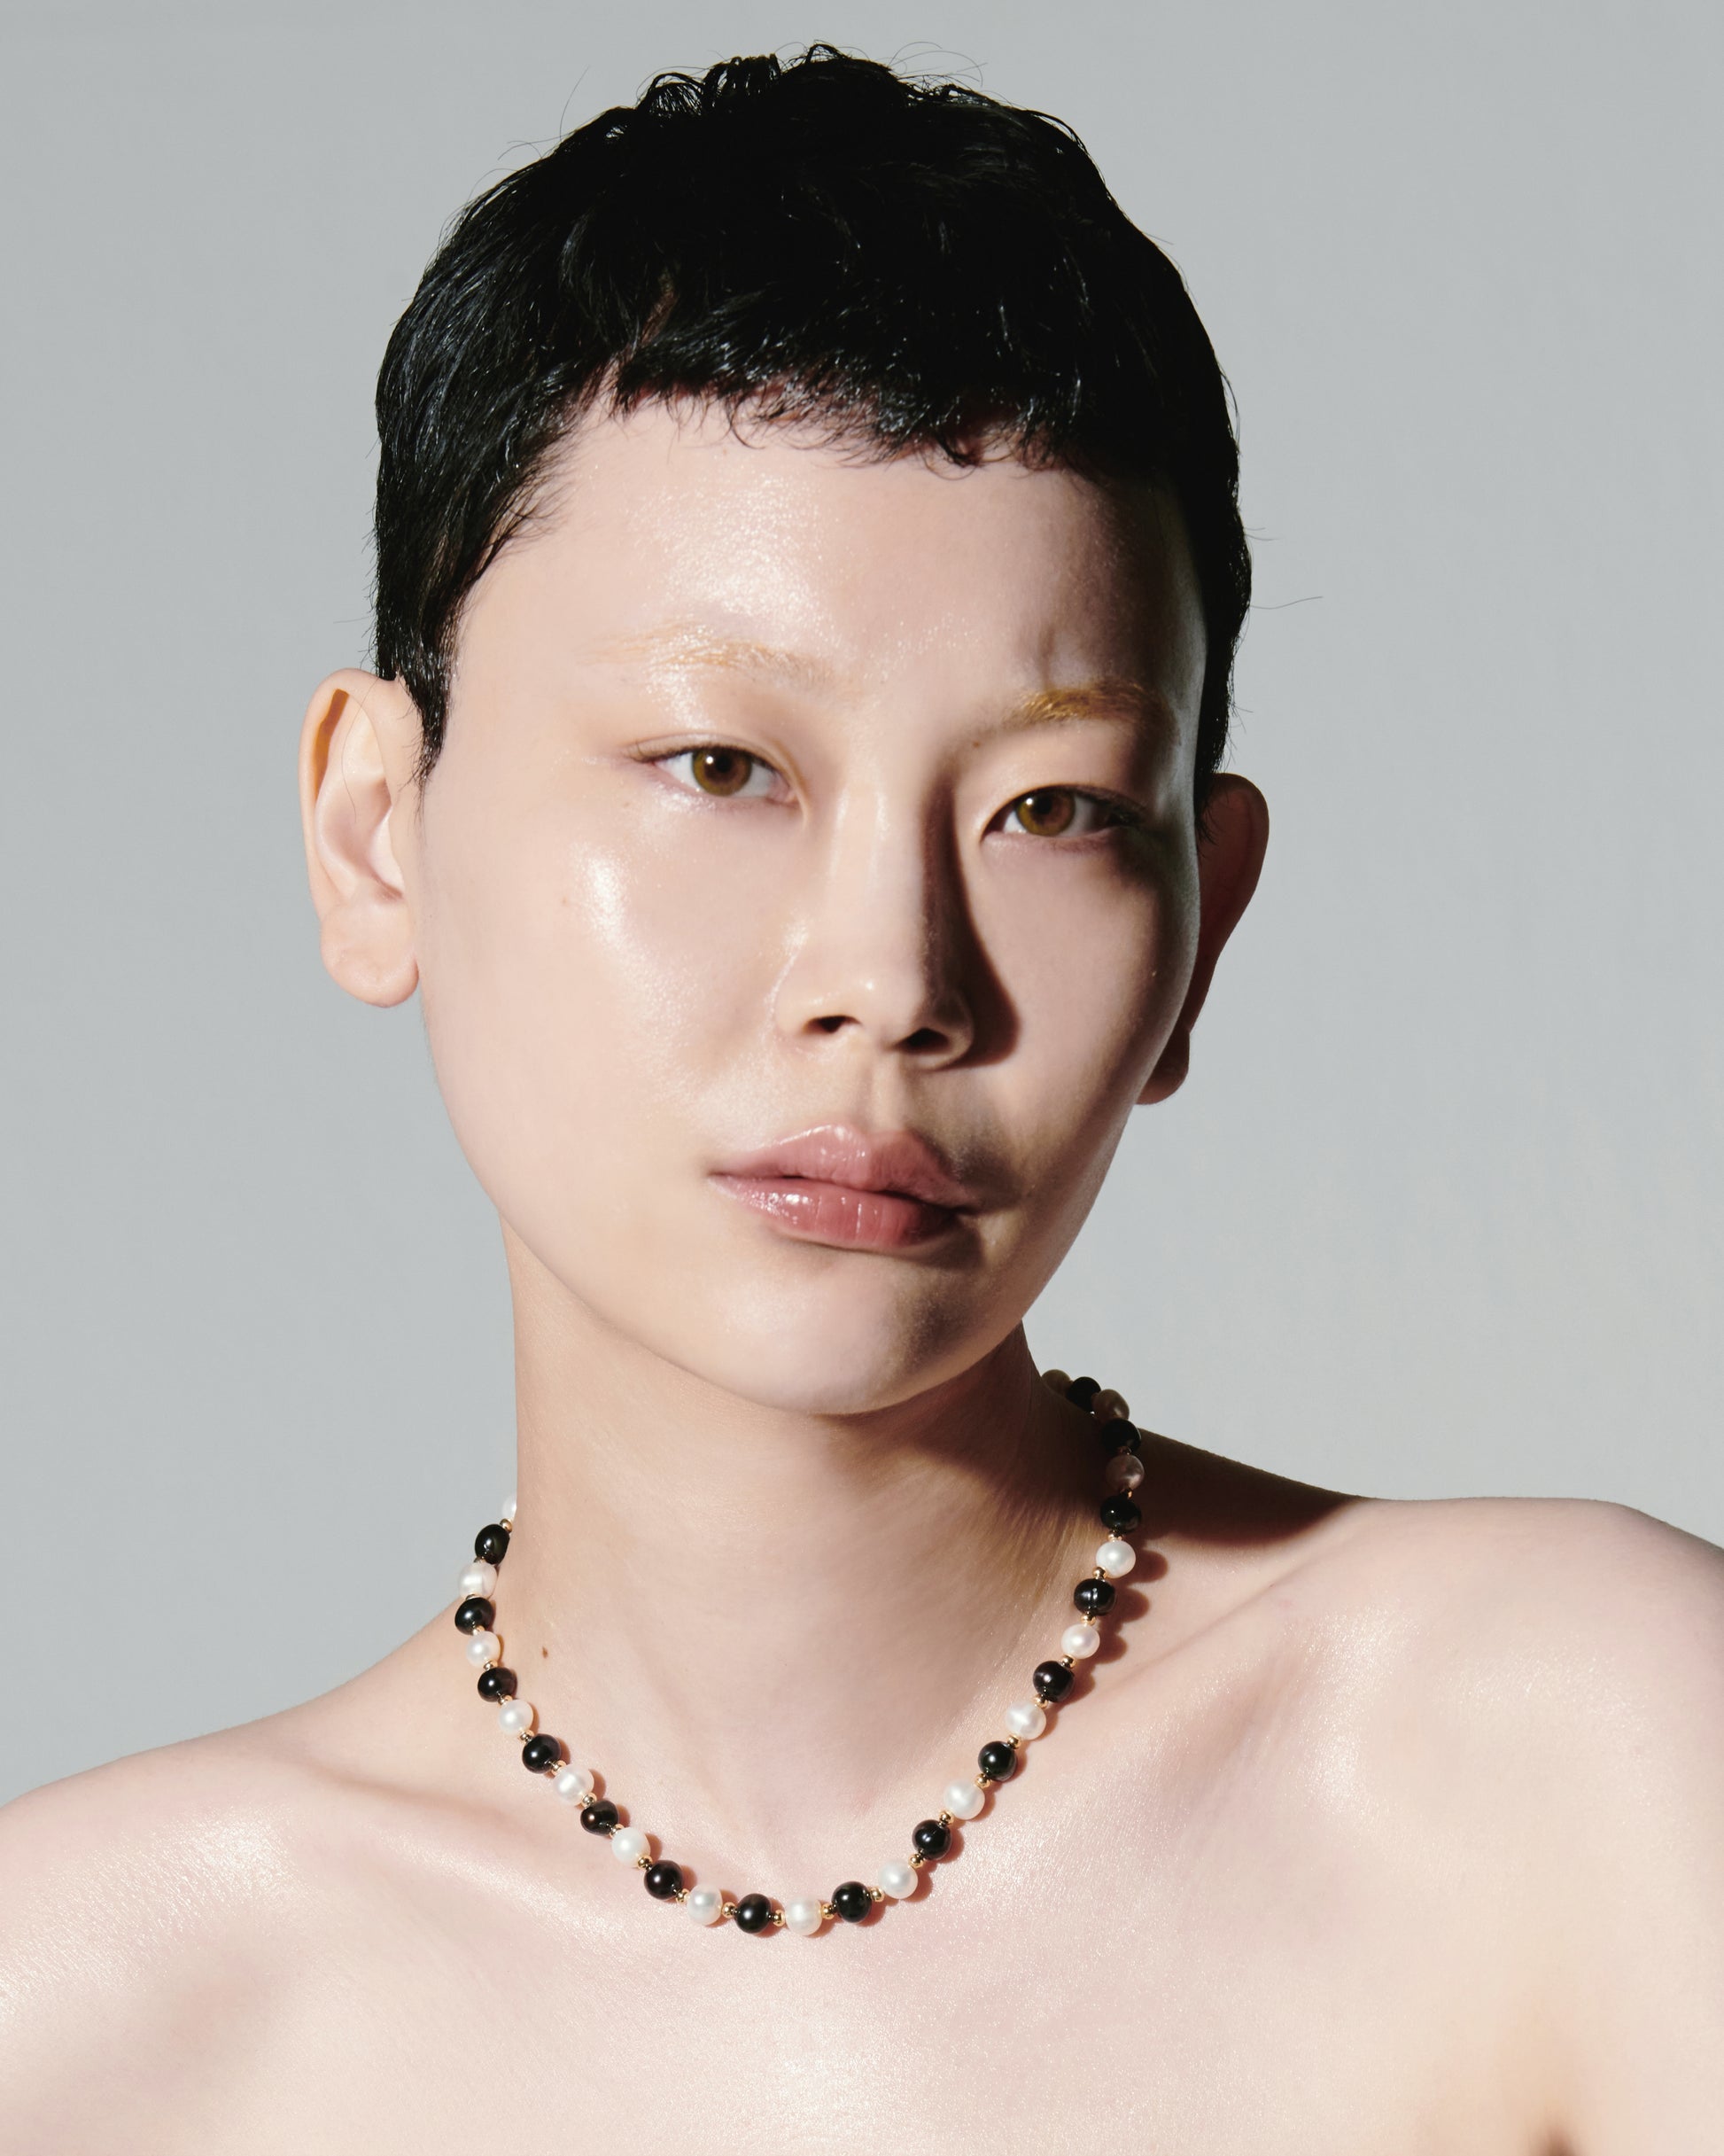 Model Wearing Nectar Black and White Ivory Pearls With Gold Metal Beads Necklace Choker Classic Modern Style Seoul Korea